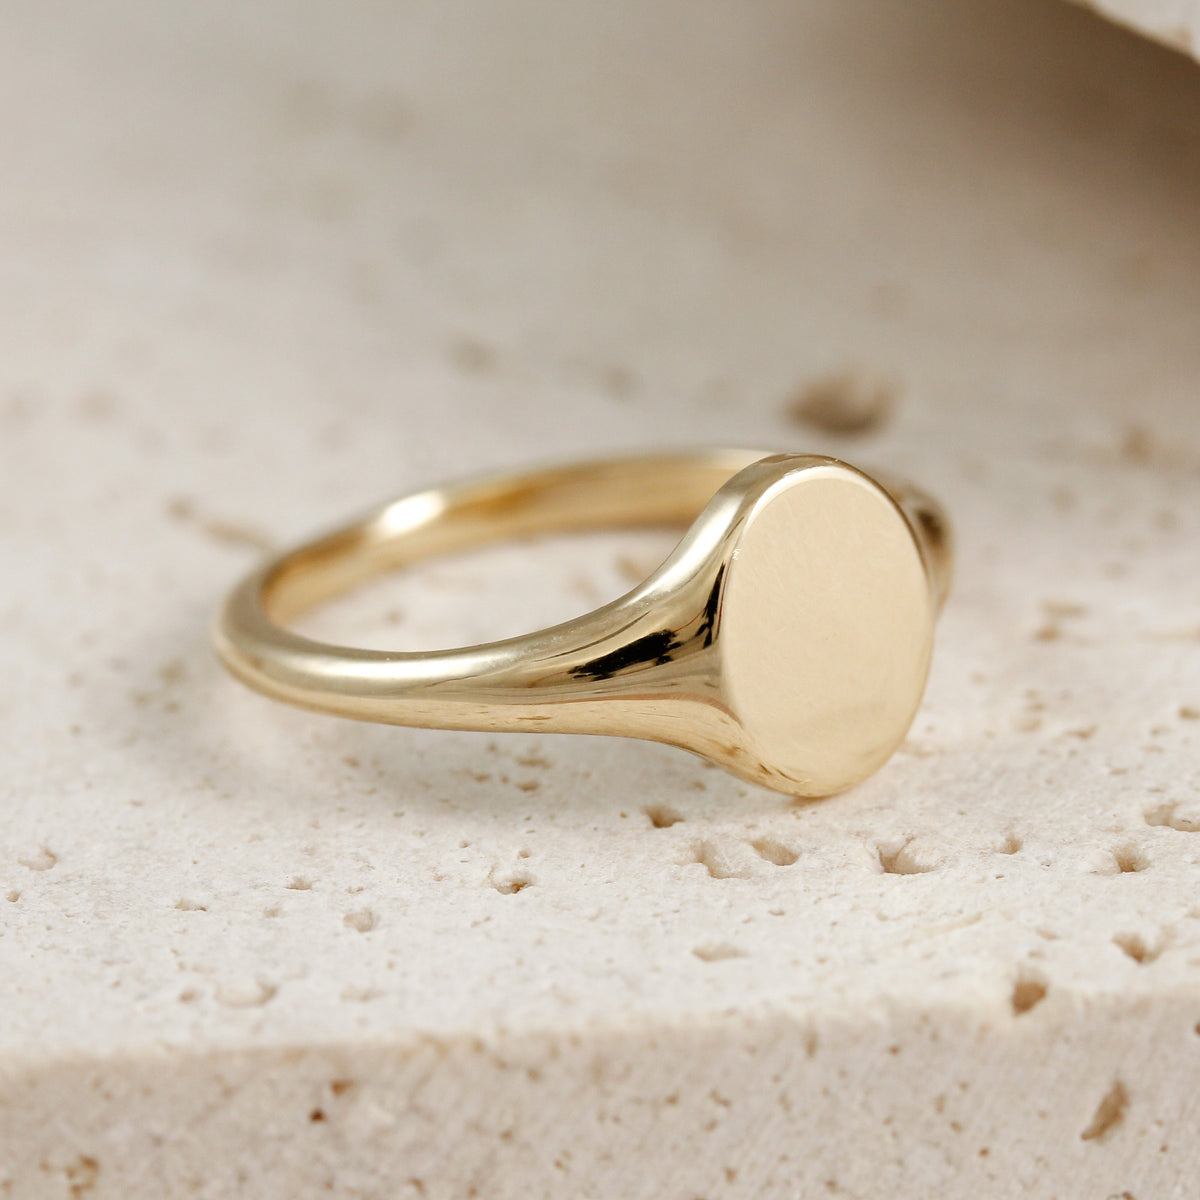 9.6 x 7.1mm oval solid recycled gold signet ring